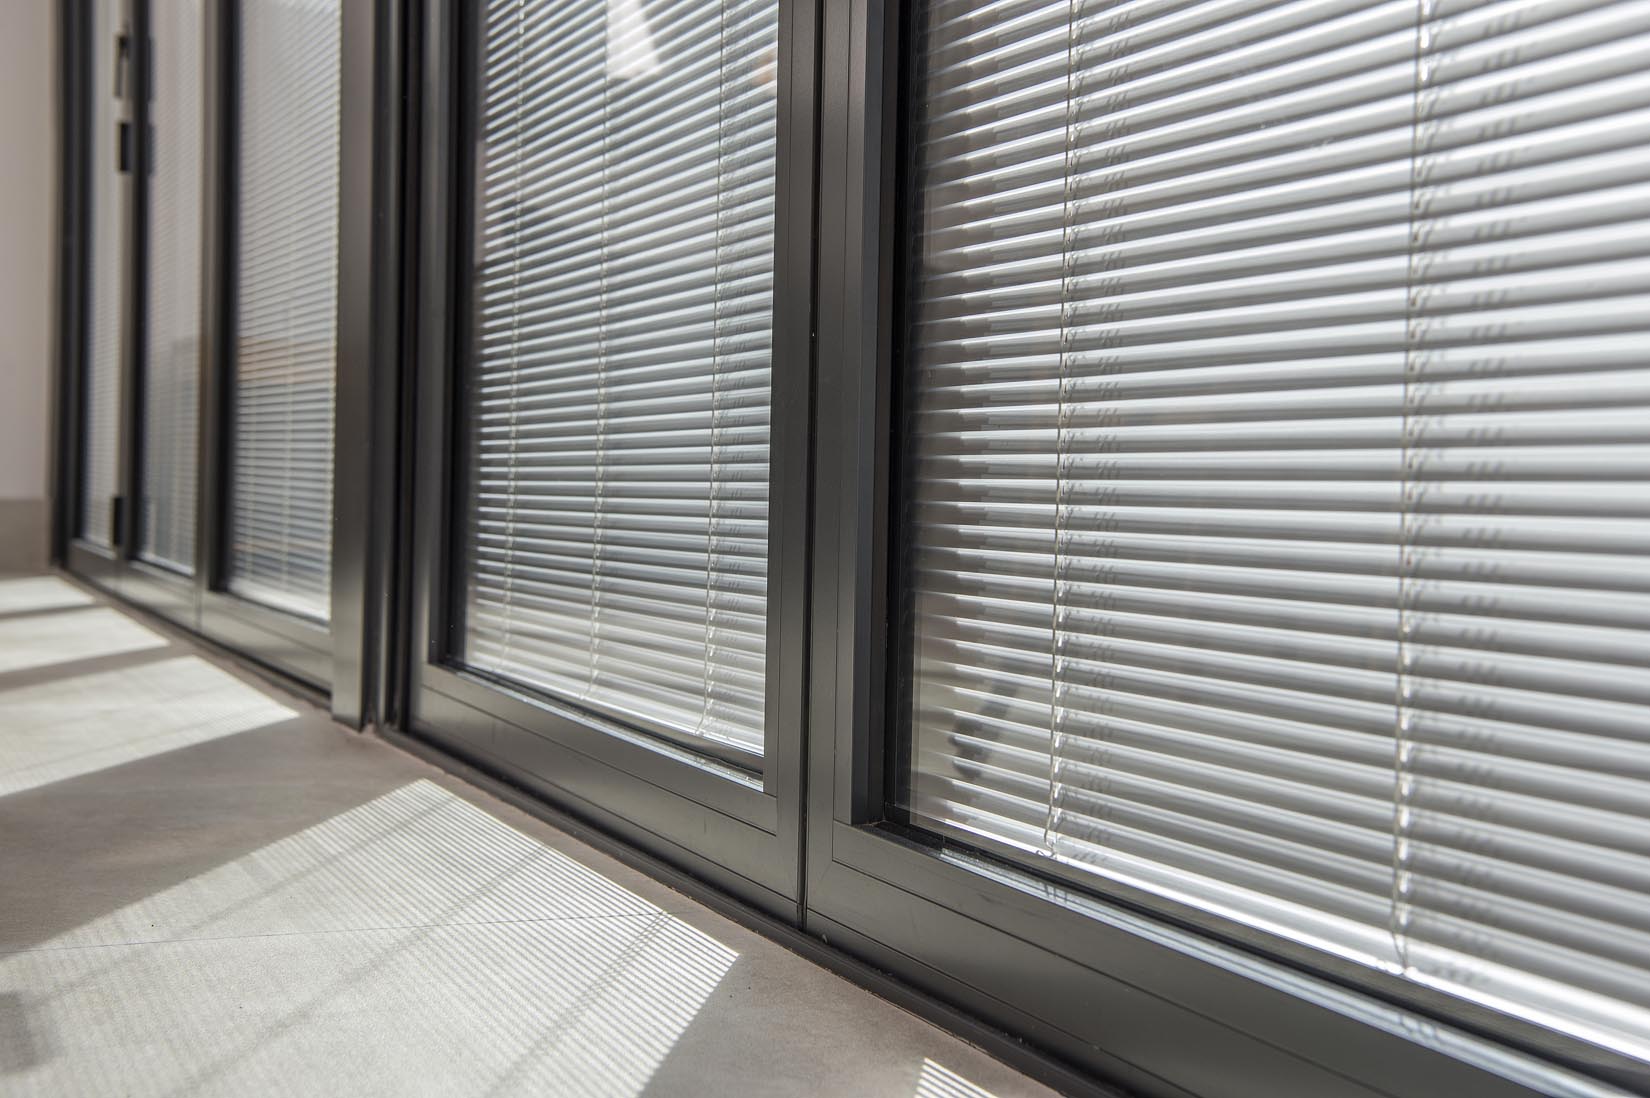 Integral blinds with solar control glass to reduce summer overheating and glare.